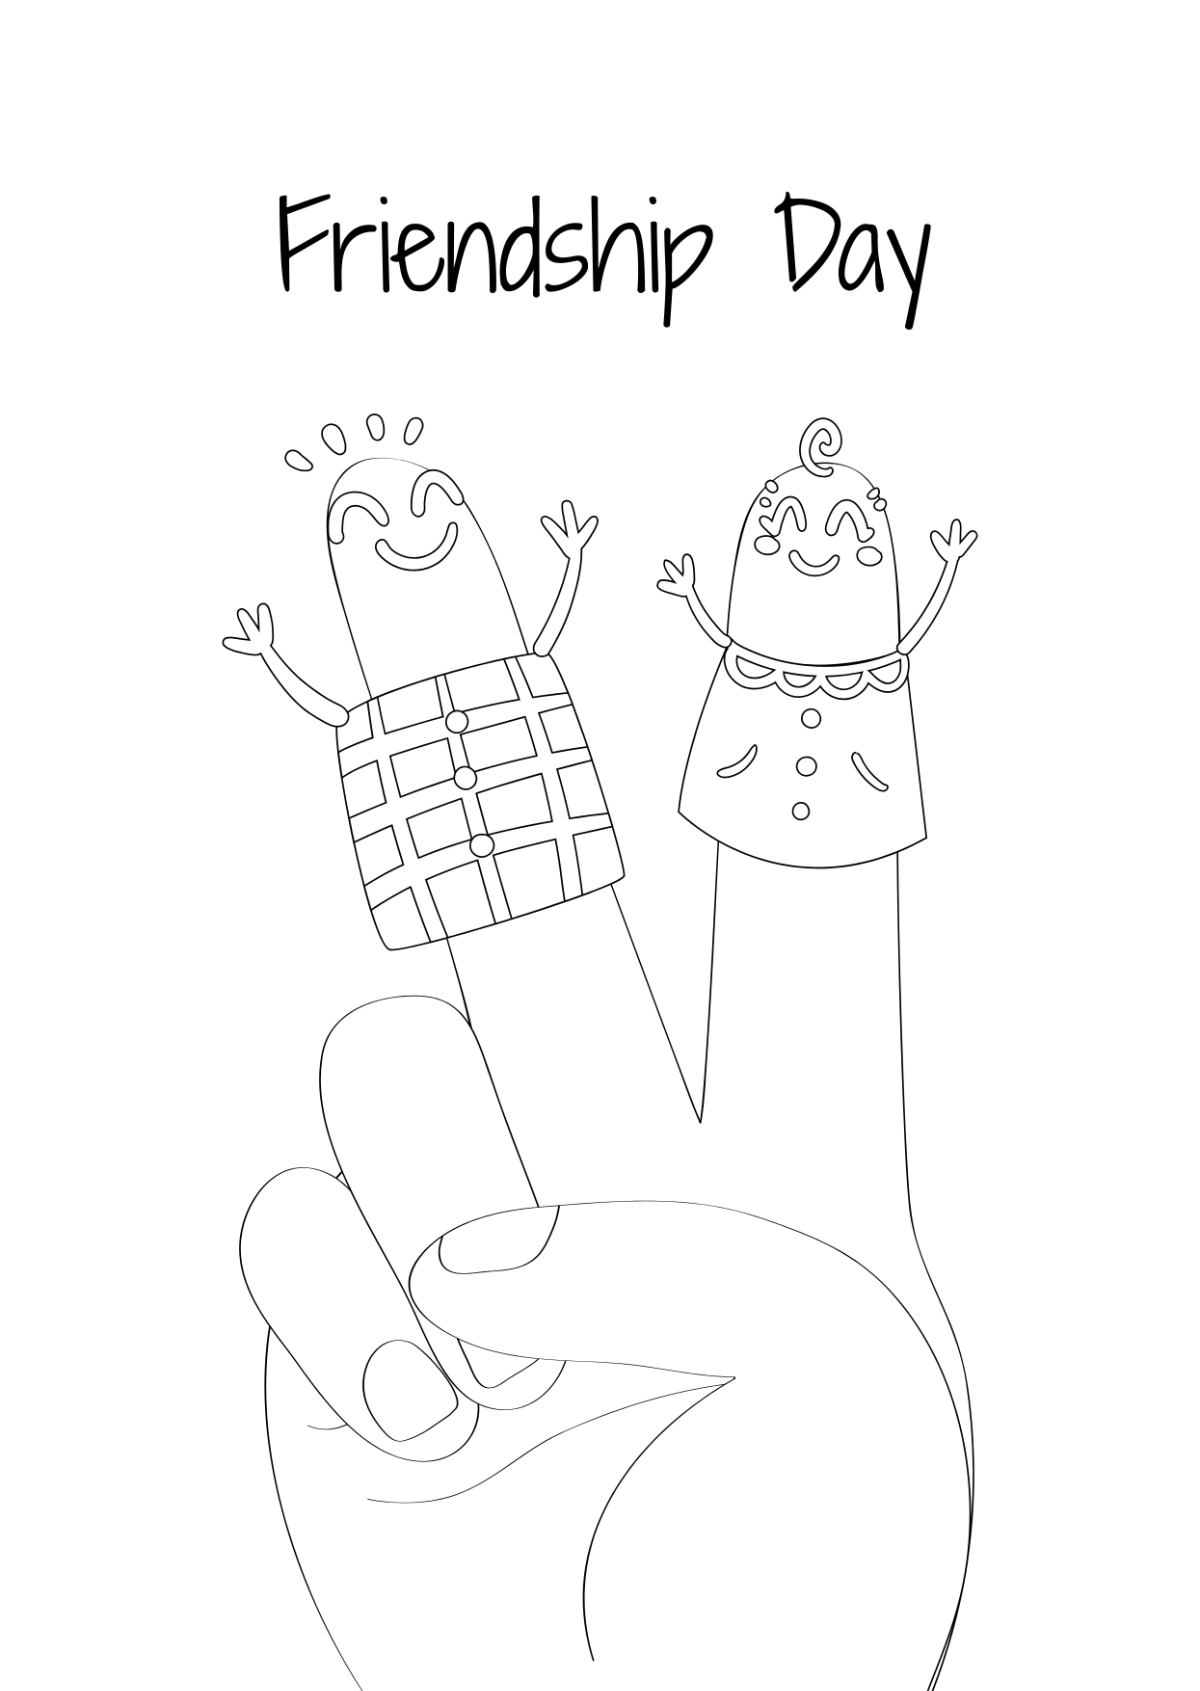 Friendship Day Drawing for Kids